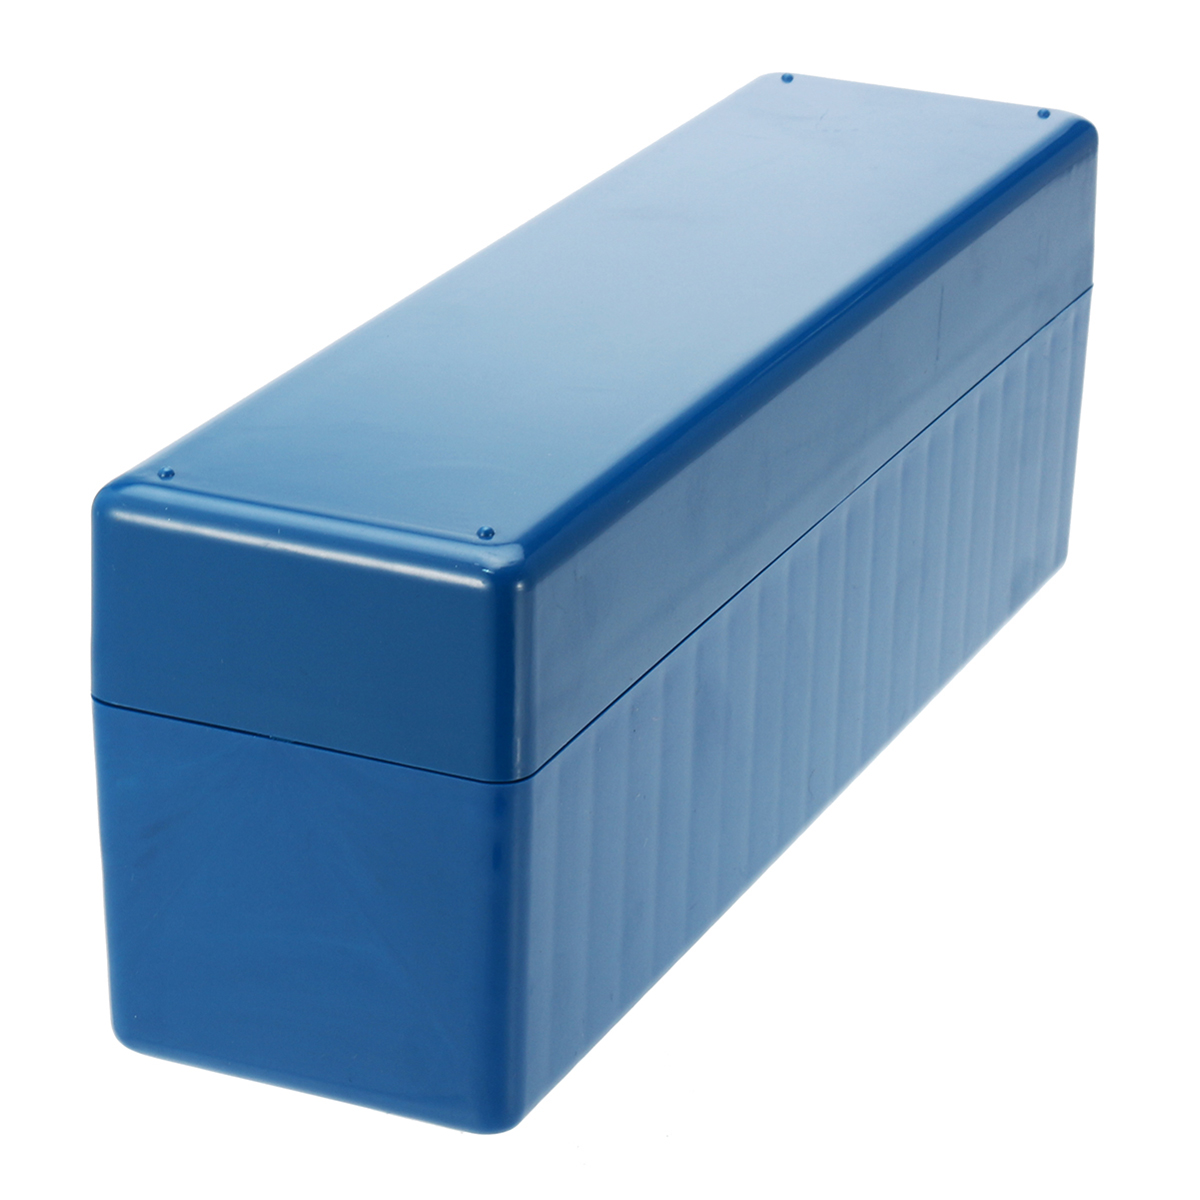 25x9x7cm-Blue-Storage-Tool-Box-Case-Holds-20-Individual-Certified-PCGS-NGC-ICG-Coin-Holders-1425243-3